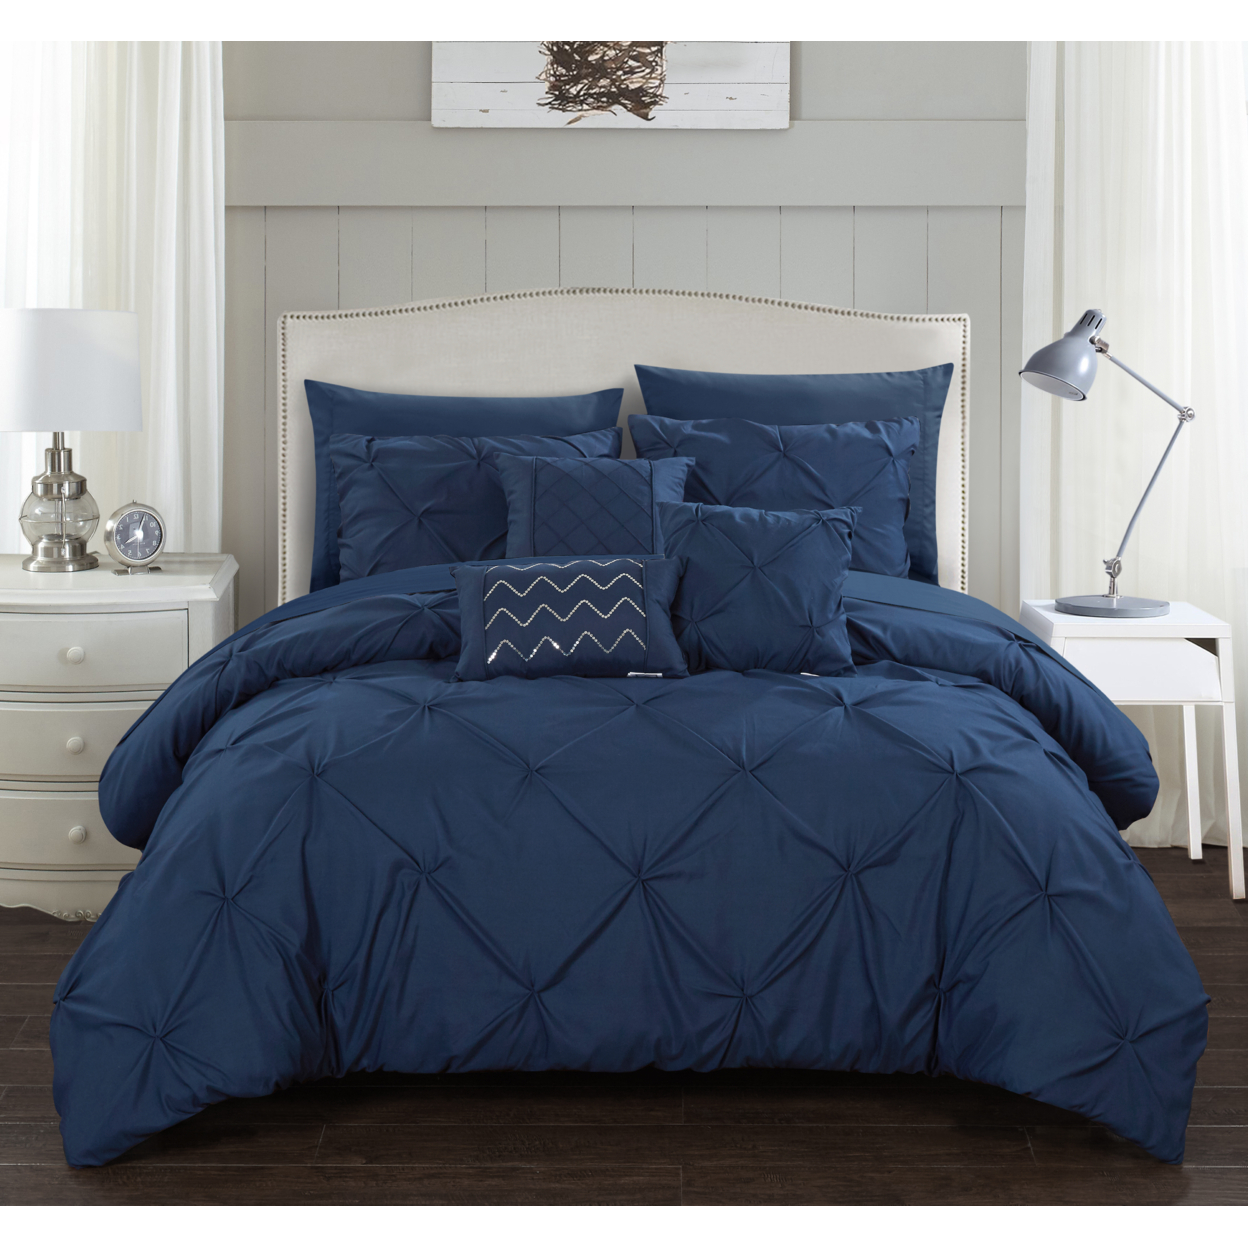 Alvatore Pinch Pleated Bed In A Bag Comforter Set - Navy, King